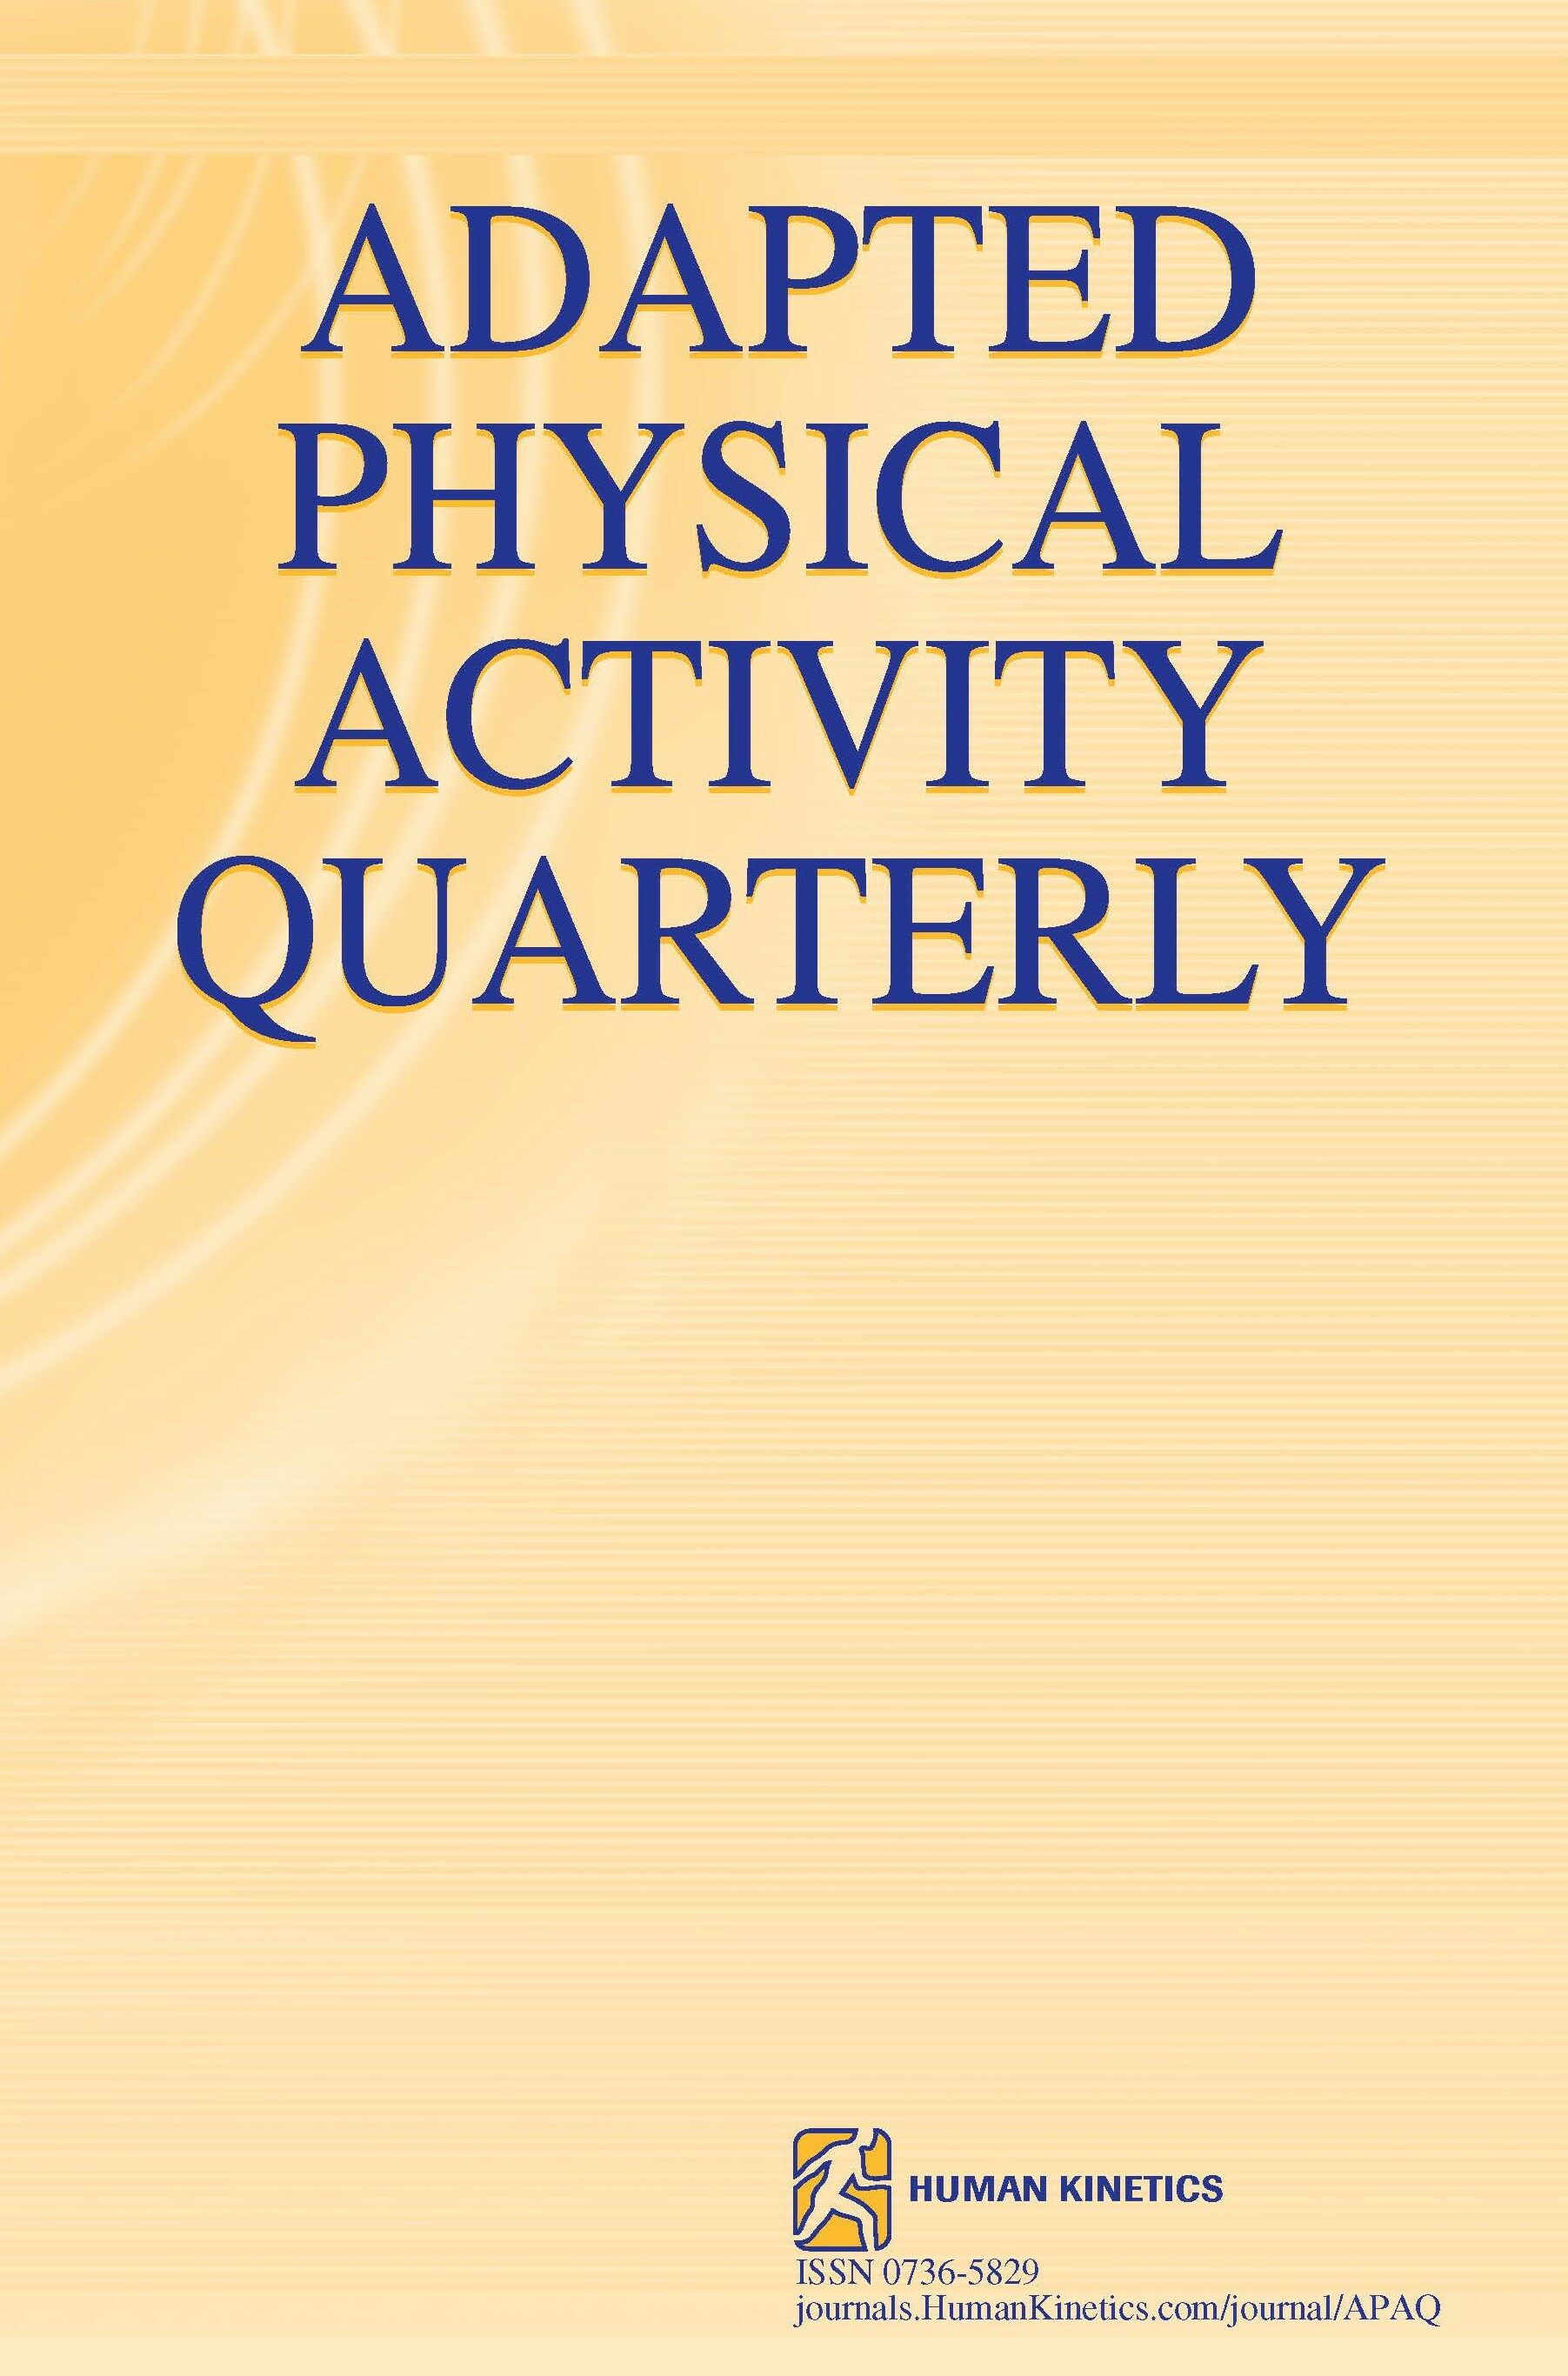 Effect of Combined Training With Balance, Strength, and Plyometrics on Physical Performance in Male Sprint Athletes With Intellectual Disabilities